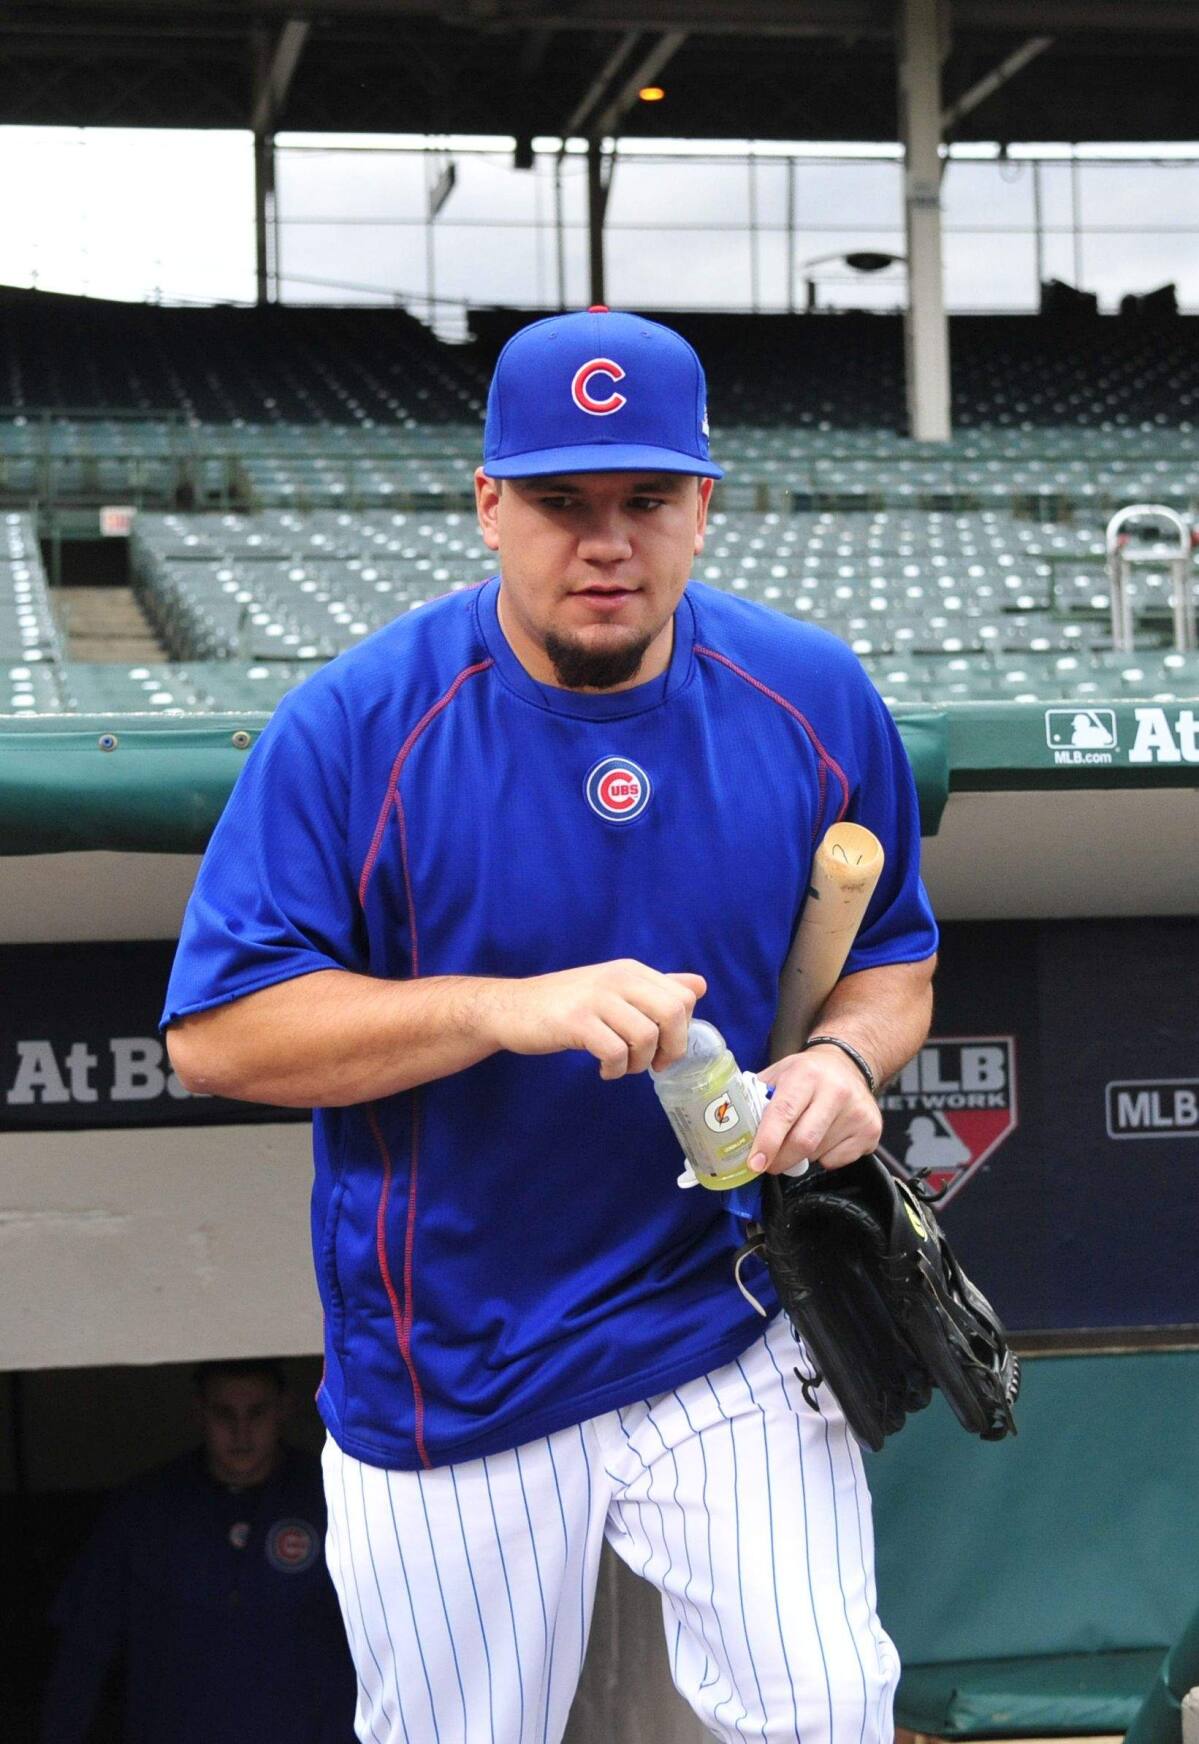 Cubs hero Kyle Schwarber showed off power swing in Cardinal Newman workout